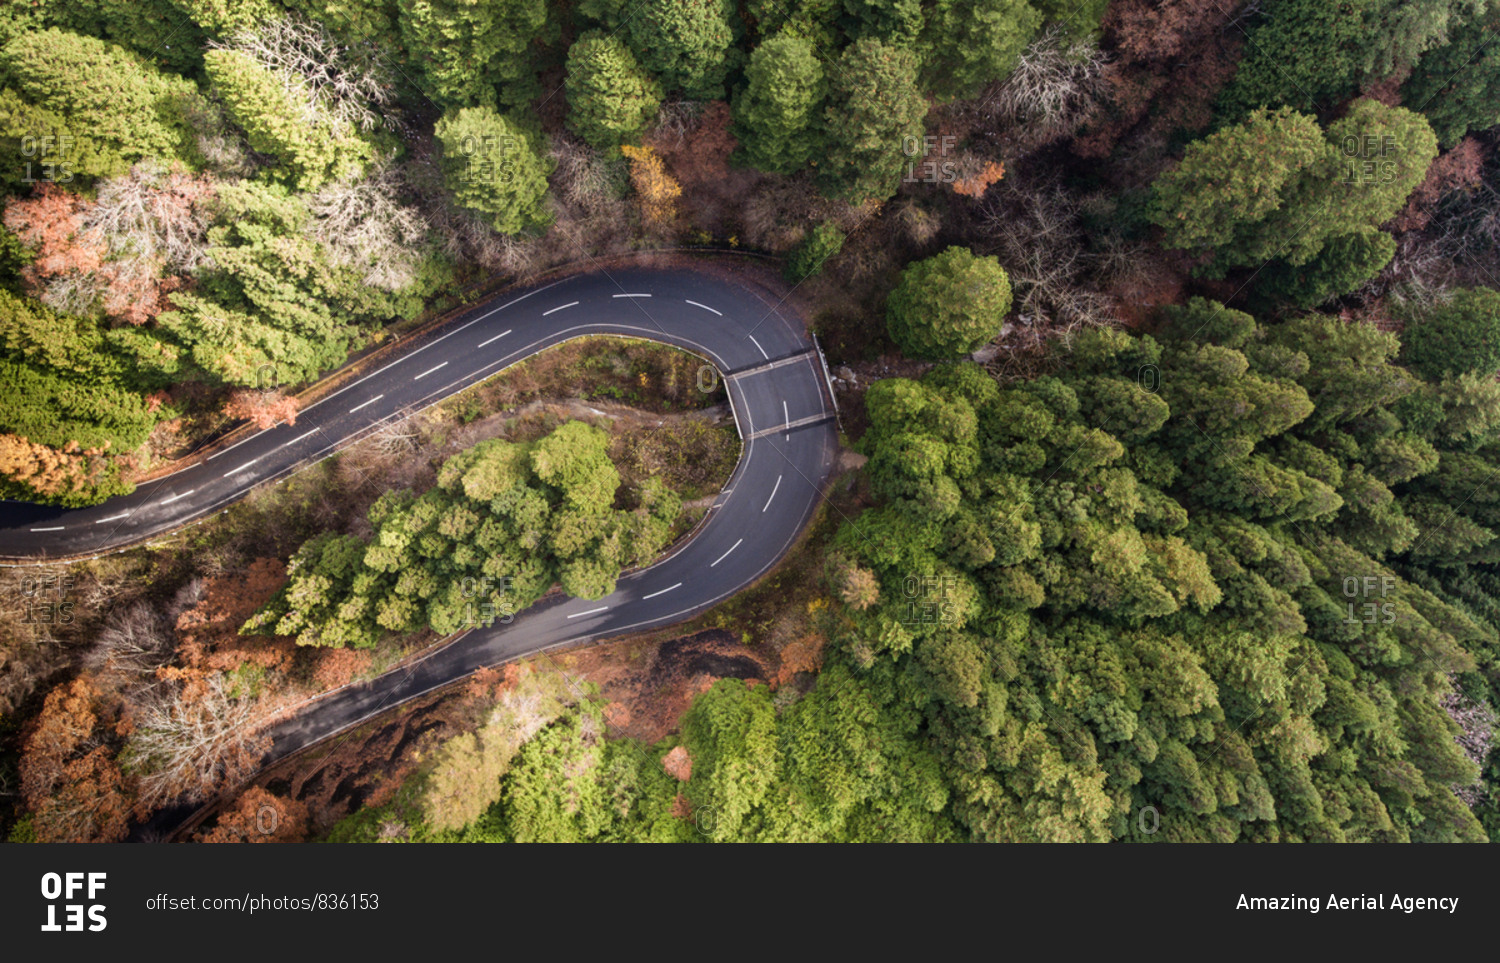 Aerial view of a road crossing a Japanease forest, Japan, Asia.